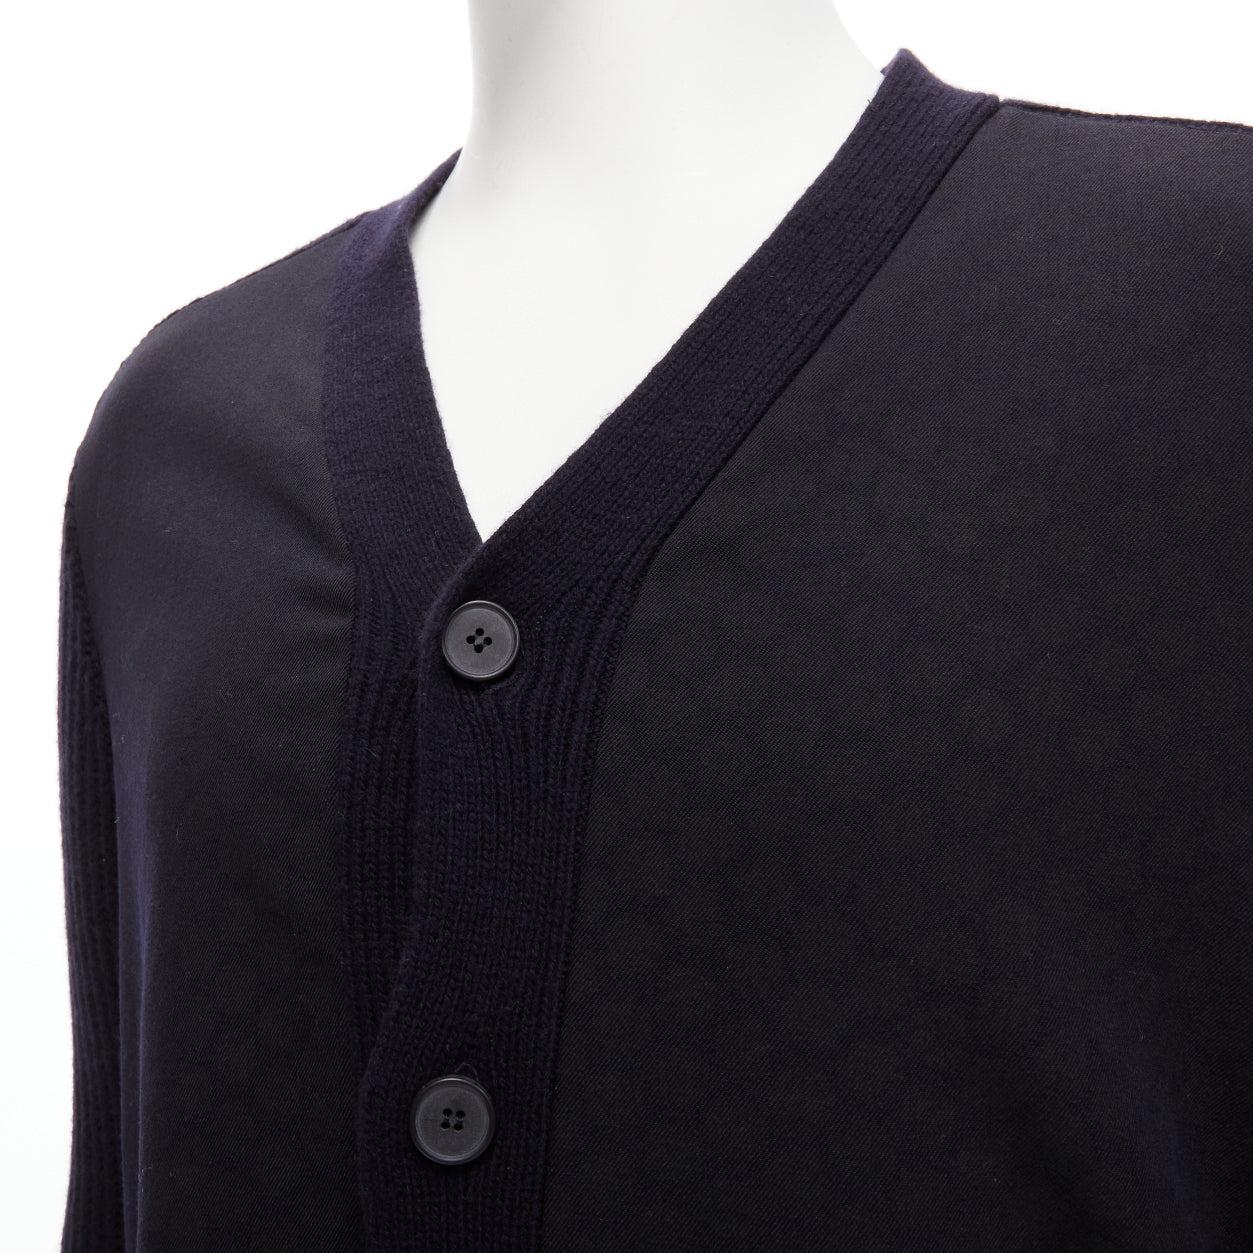 MARNI navy virgin wool cashmere polka dot cardigan sweater IT48 M
Reference: YNWG/A00176
Brand: Marni
Material: Virgin Wool, Cashmere
Color: Navy, Grey
Pattern: Polka Dot
Closure: Button
Extra Details: Discreet polka dot panels at front.
Made in: